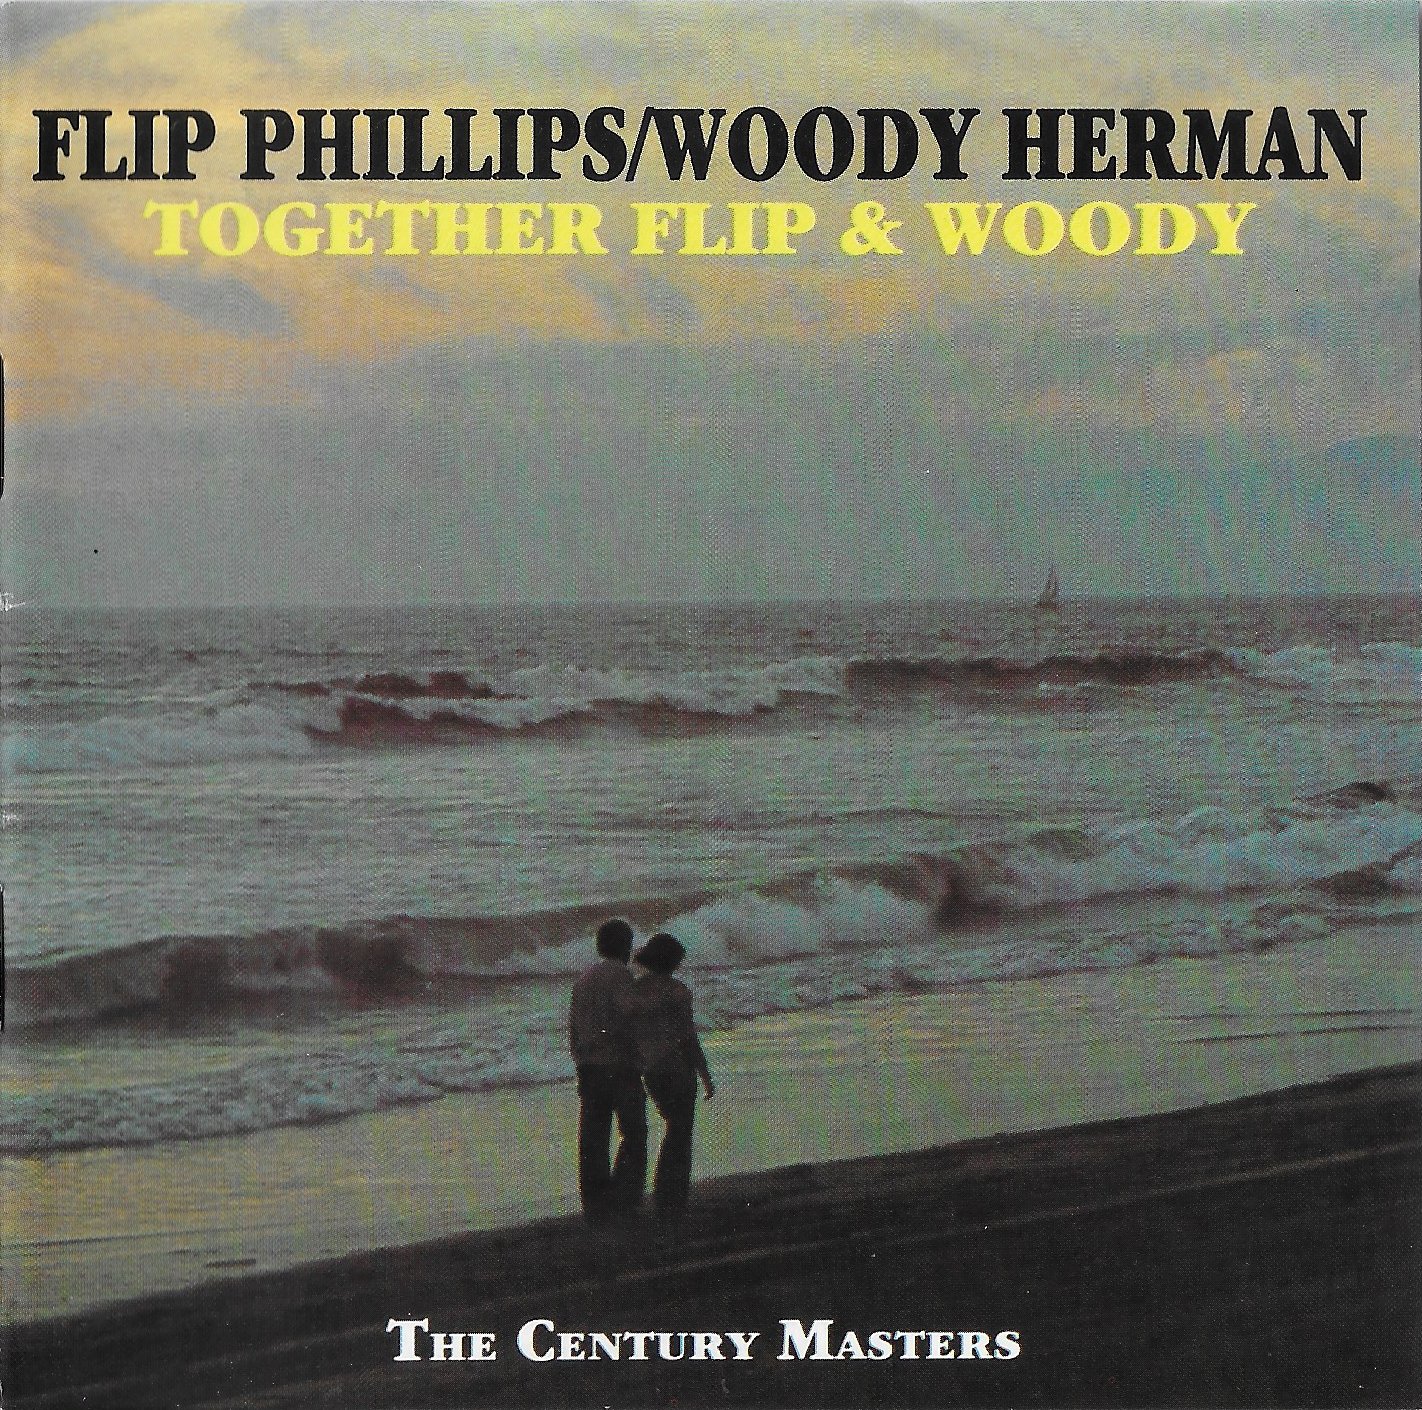 Picture of CJCD 828 The Century Catalogue - Together Flip & Woody by artist Flip Phillips / Woody Herman from the BBC cds - Records and Tapes library